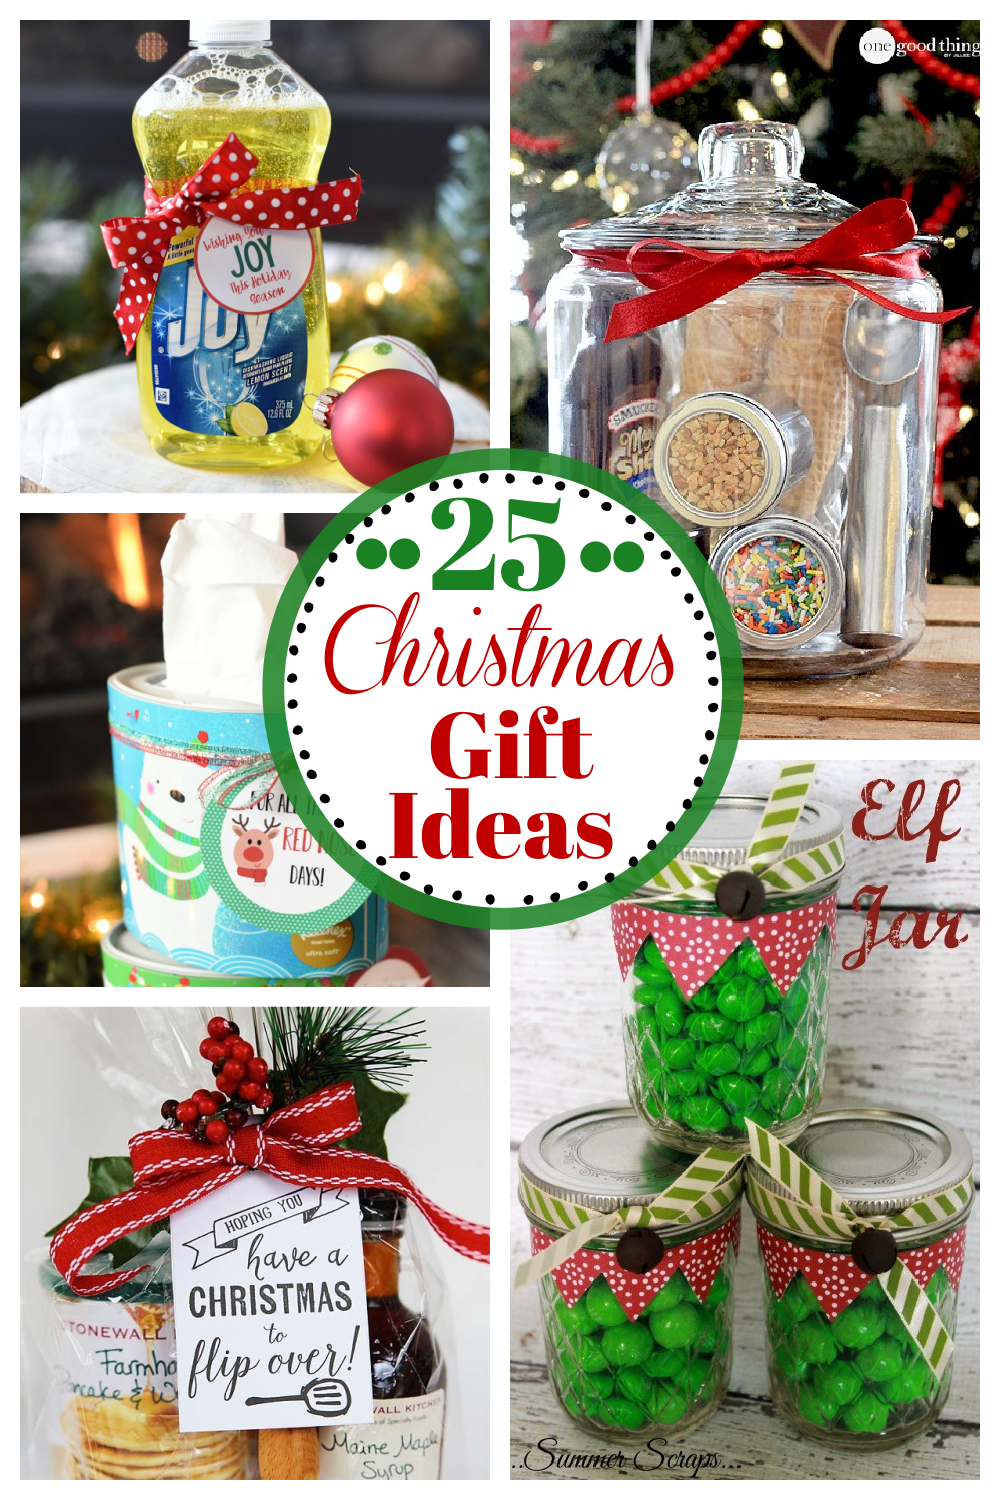 25 Christmas Gift Ideas. Fun gifts for friends and neighbors with printable tags. #neighborgifts #fungiftideas 